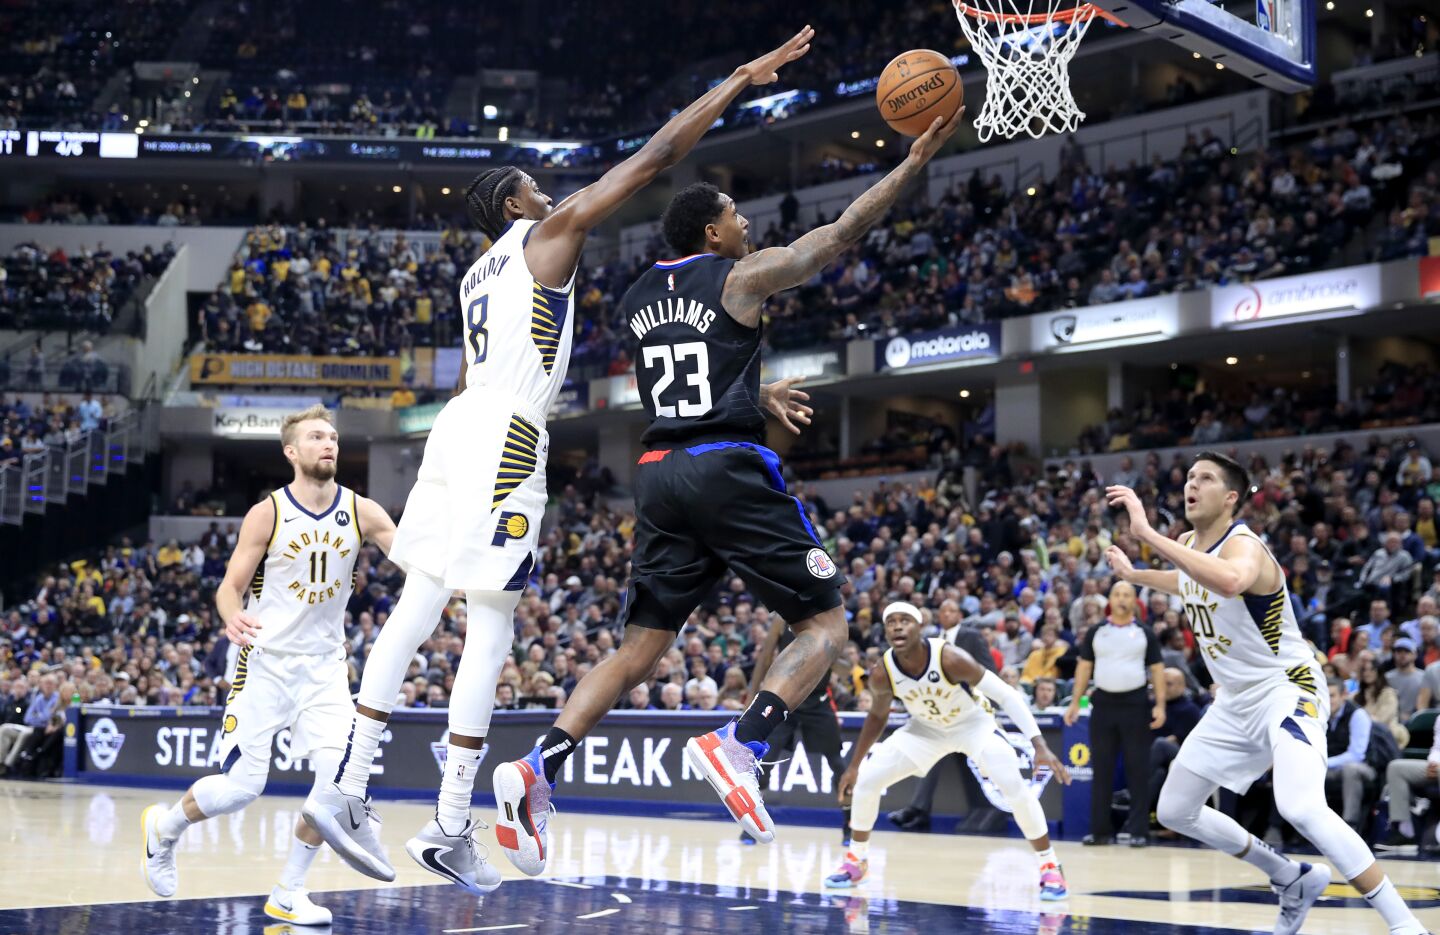 Lou Williams drives to the basket during a game against the Pacers on Dec. 9 at Bankers Life Fieldhouse.